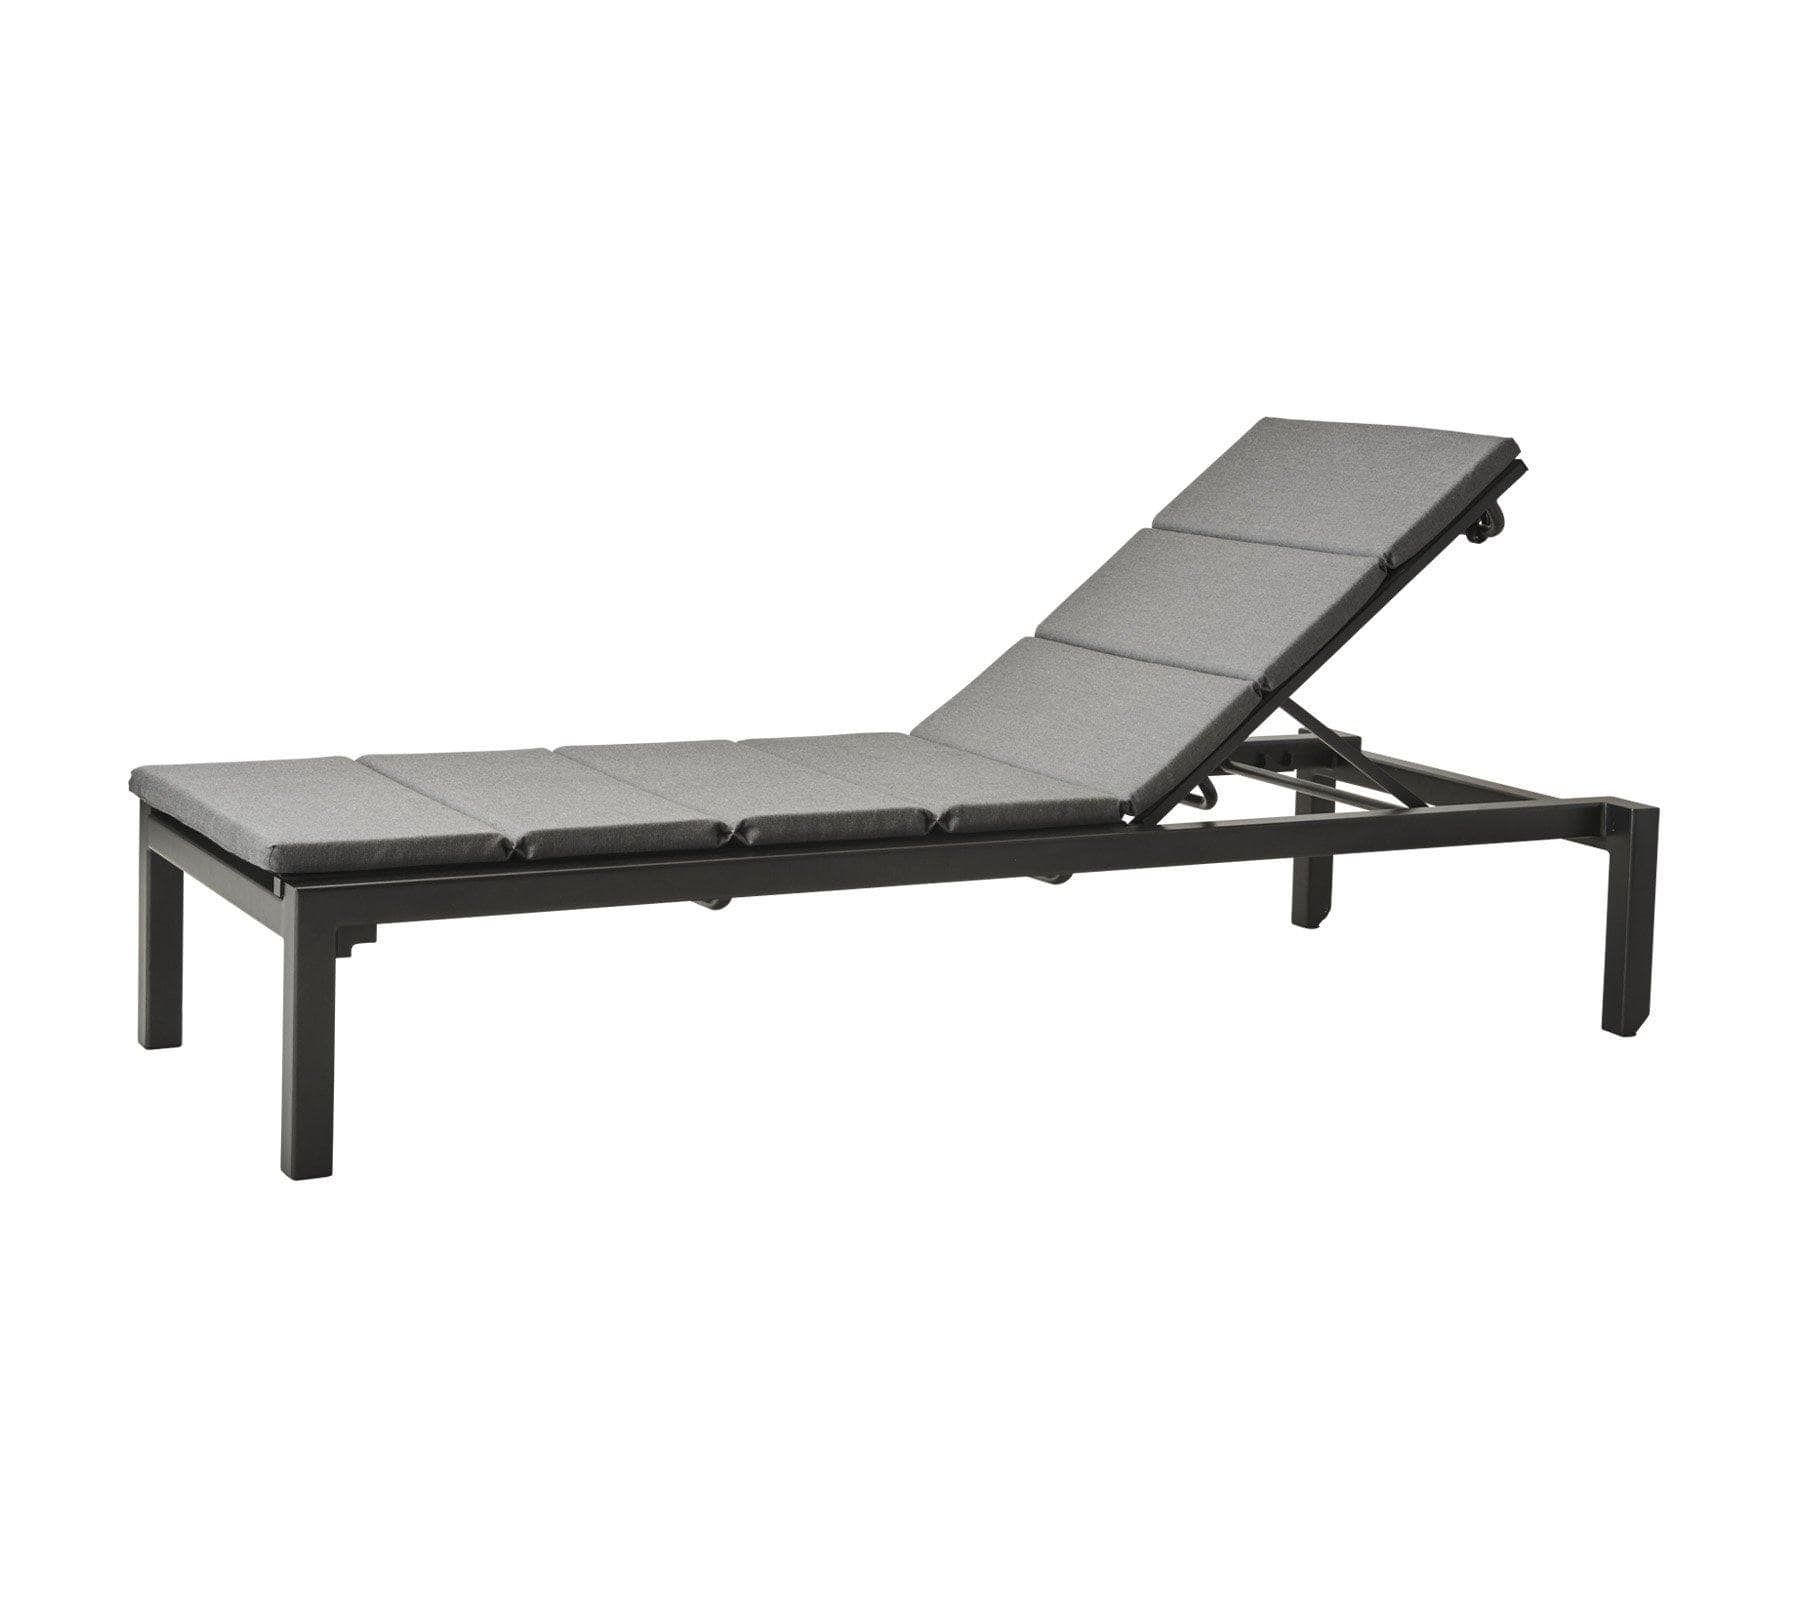 Cane-Line Denmark Chaise Lounge Cane-line Tex Grey / Grey w/QuickDry foam Cane-Line Relax Sunbed, Stackable (5966)